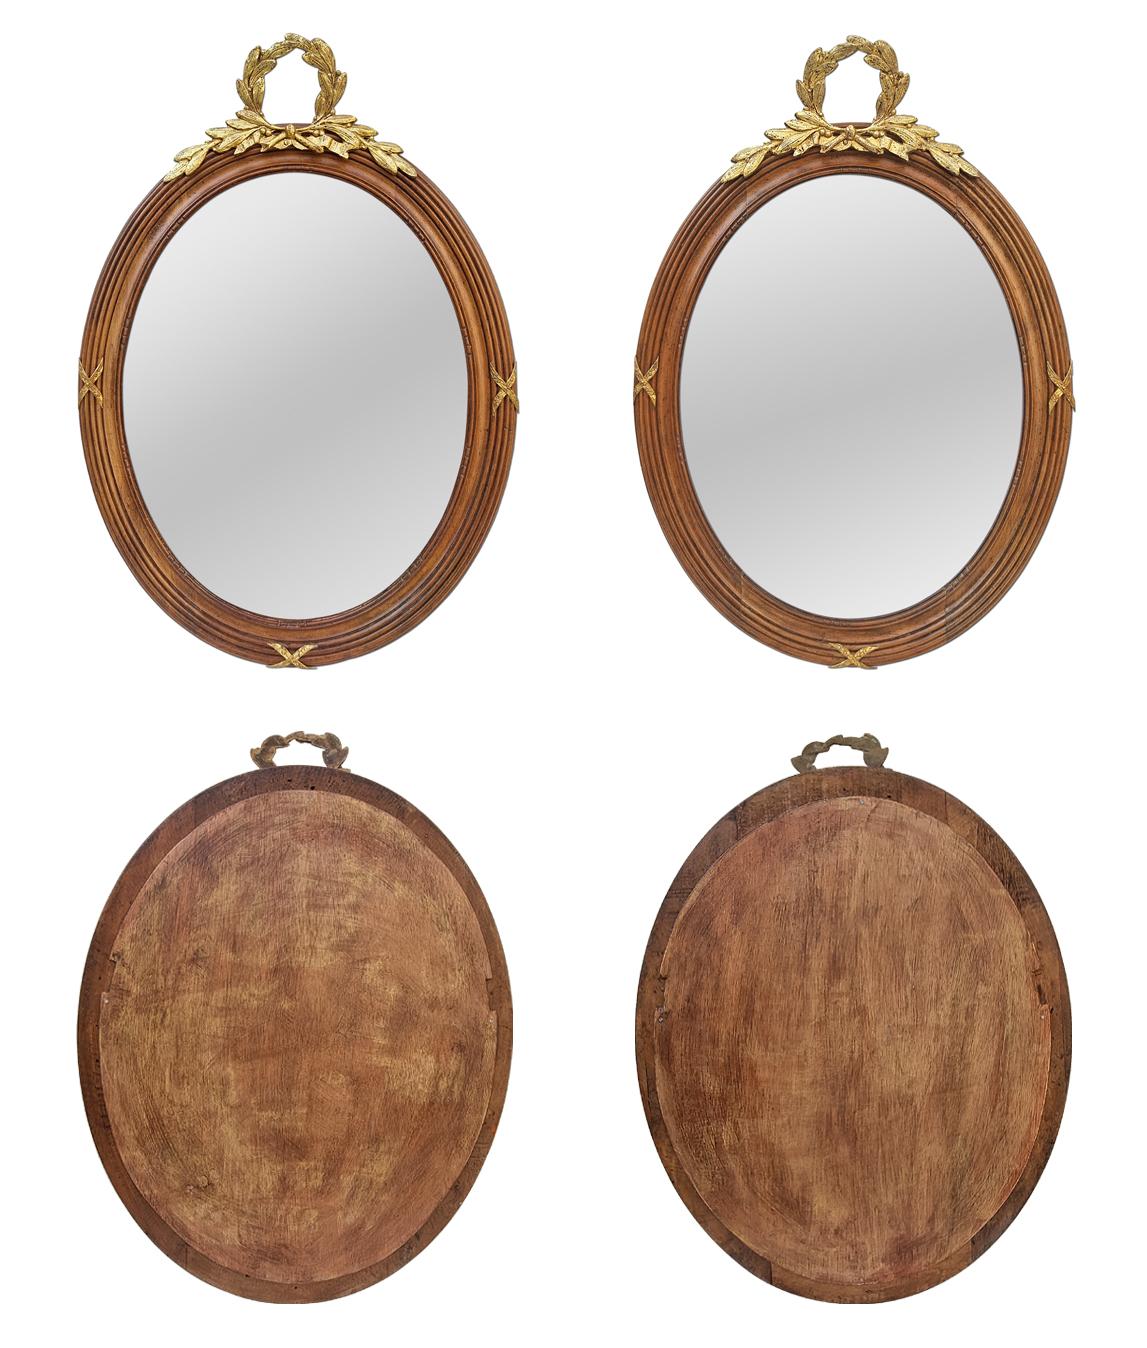 Pair of French Oval Mirrors Carved Wood & Gilt Bronze, circa 1890 For Sale 5